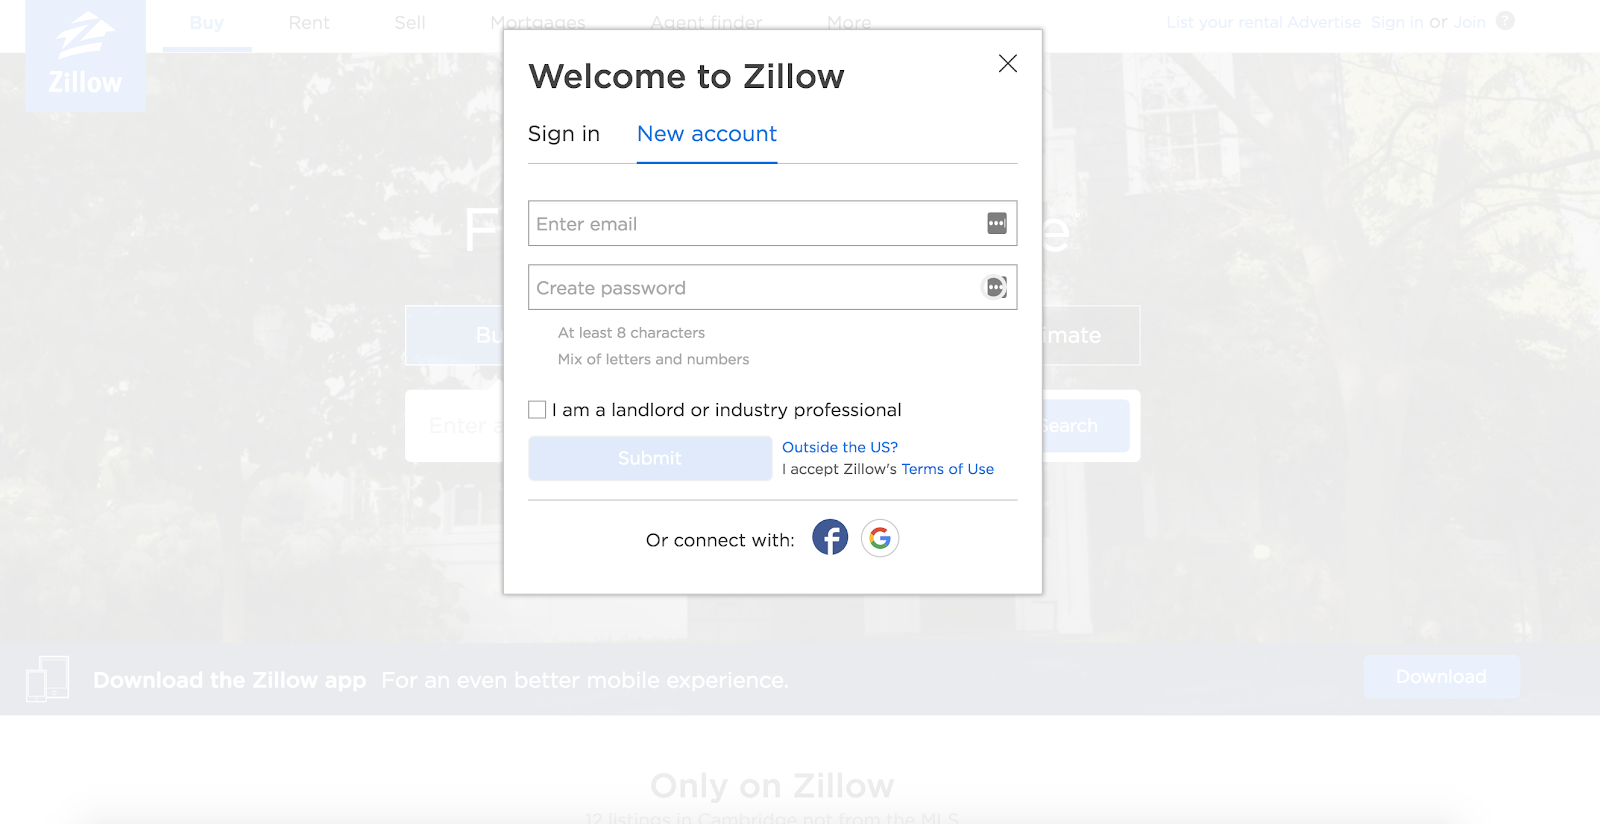 zillow-lead-generation-form